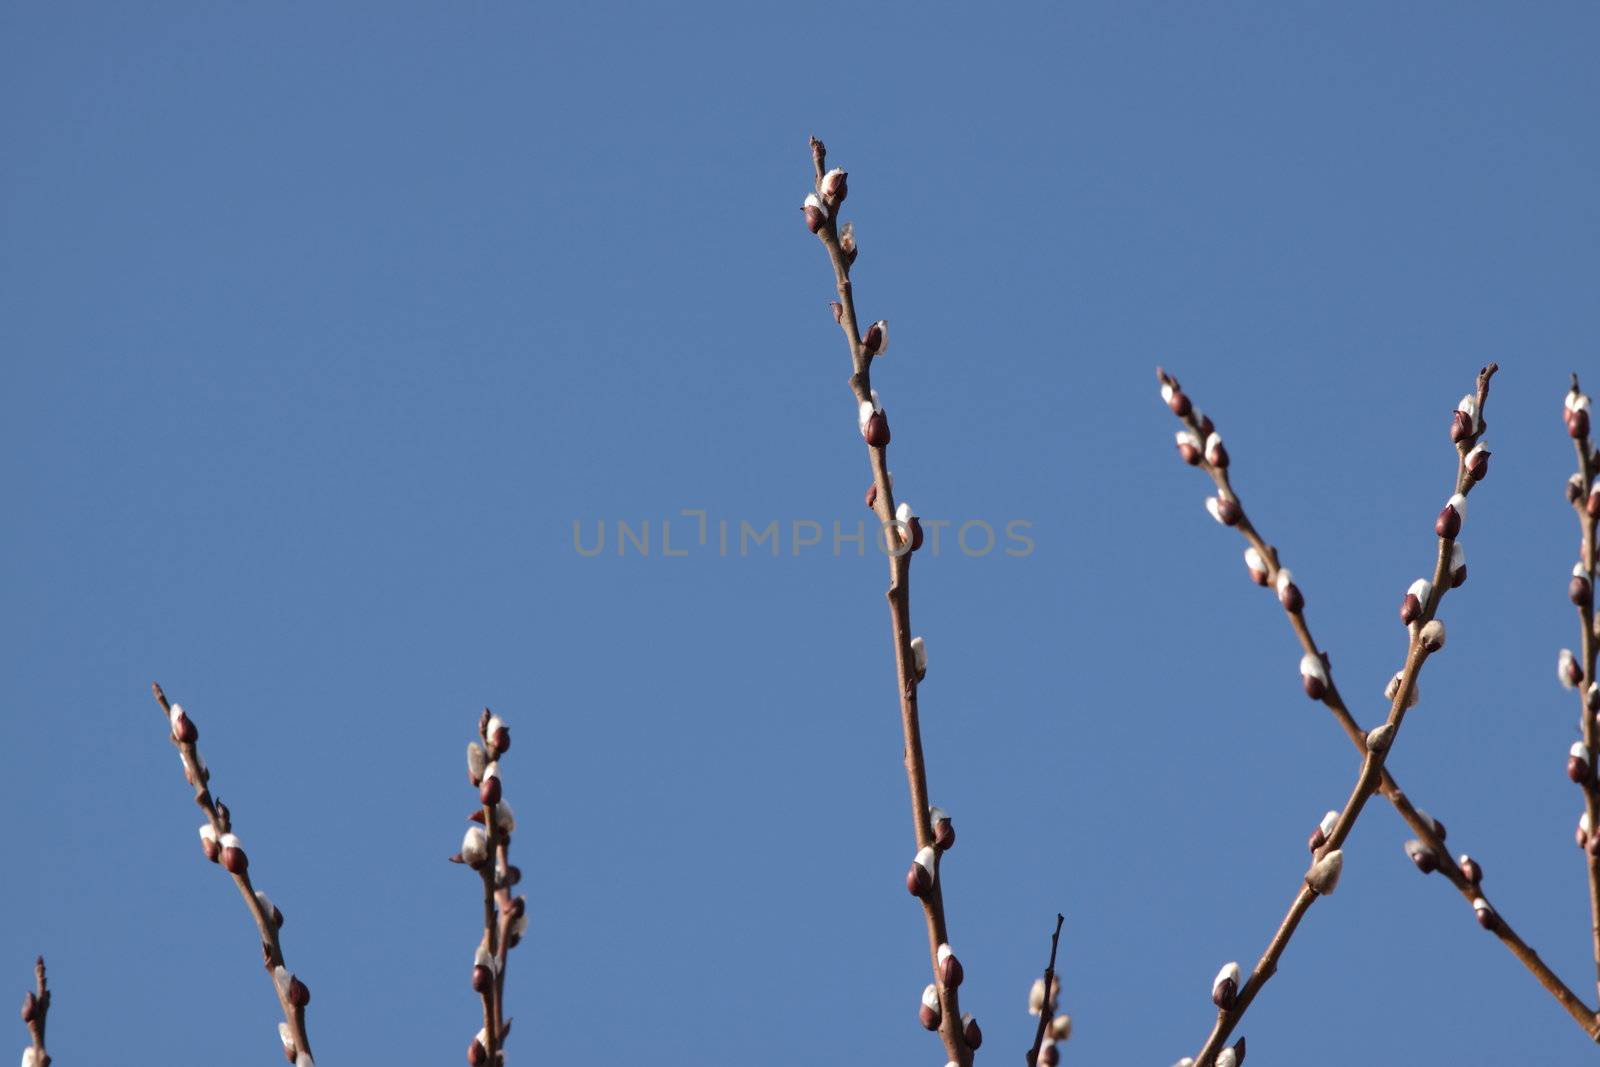 Twigs of willow with catkins on a clear sky background - easter symbol